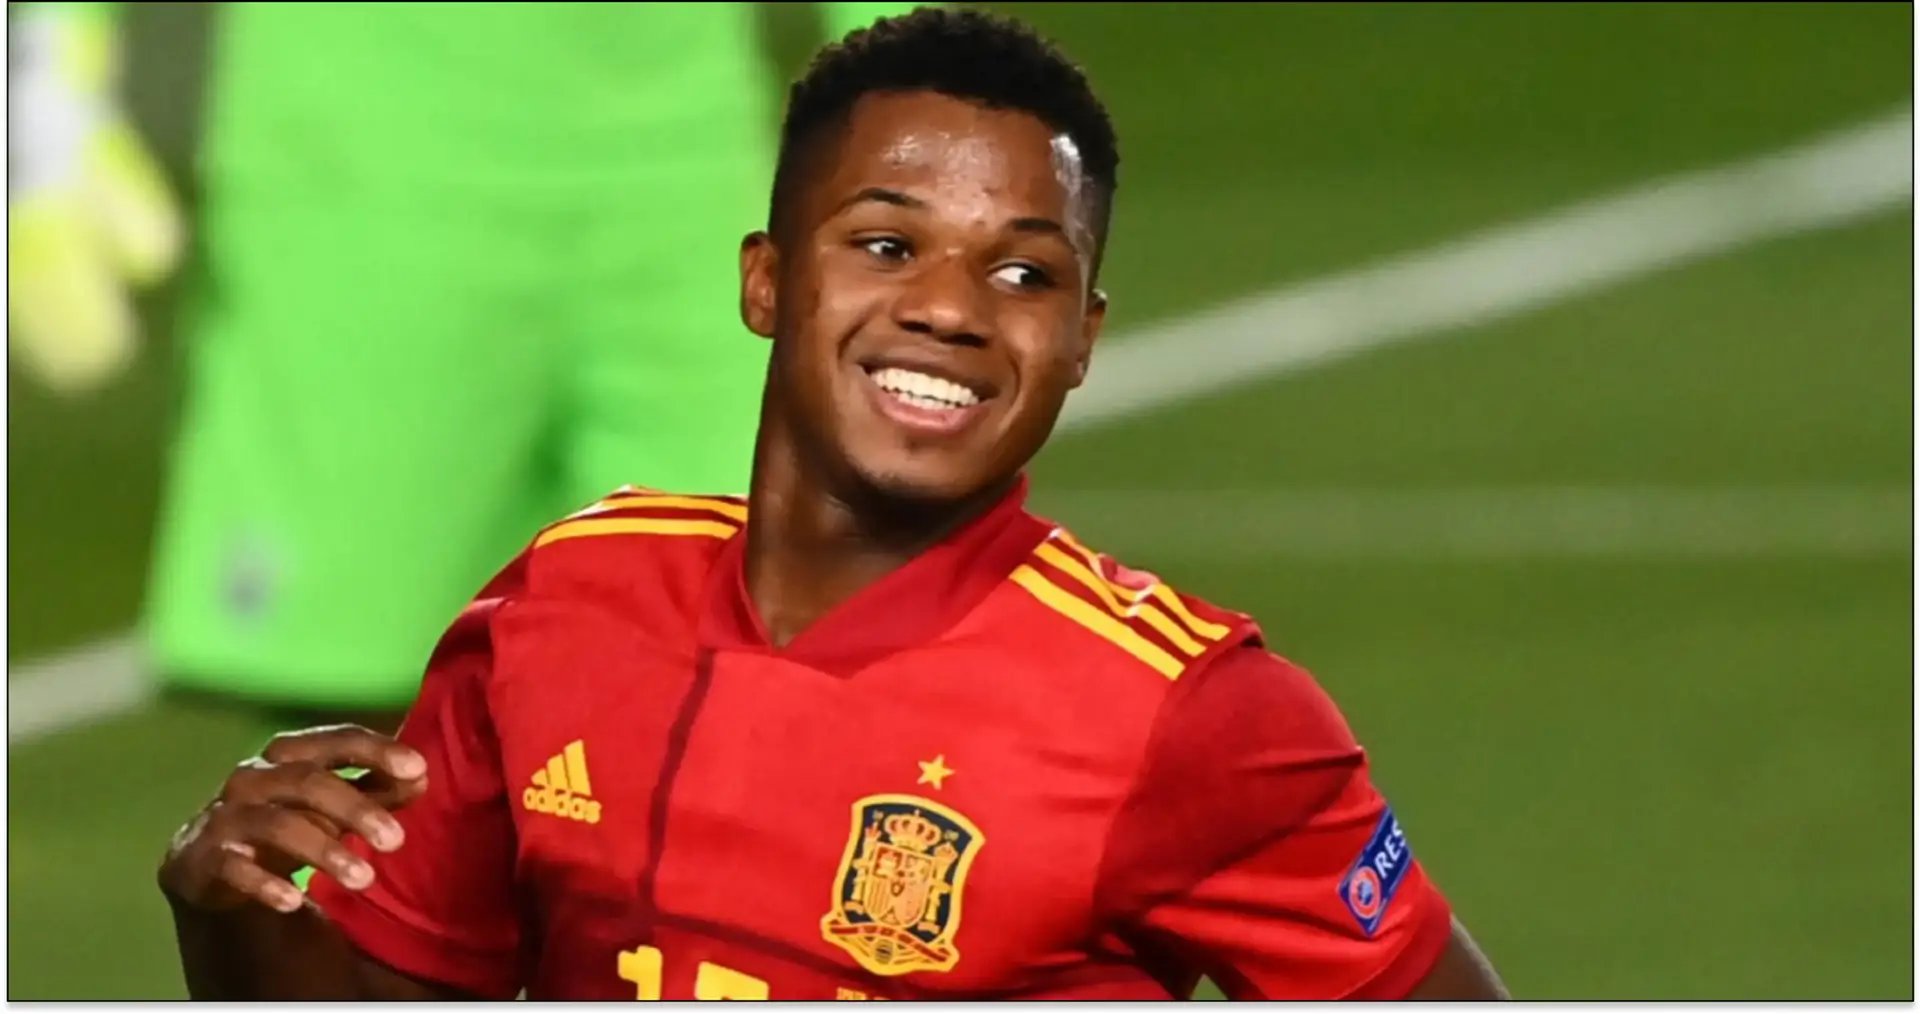 Spain head coach: 'Ansu Fati feels happy and free with us ... I blindly trust him'